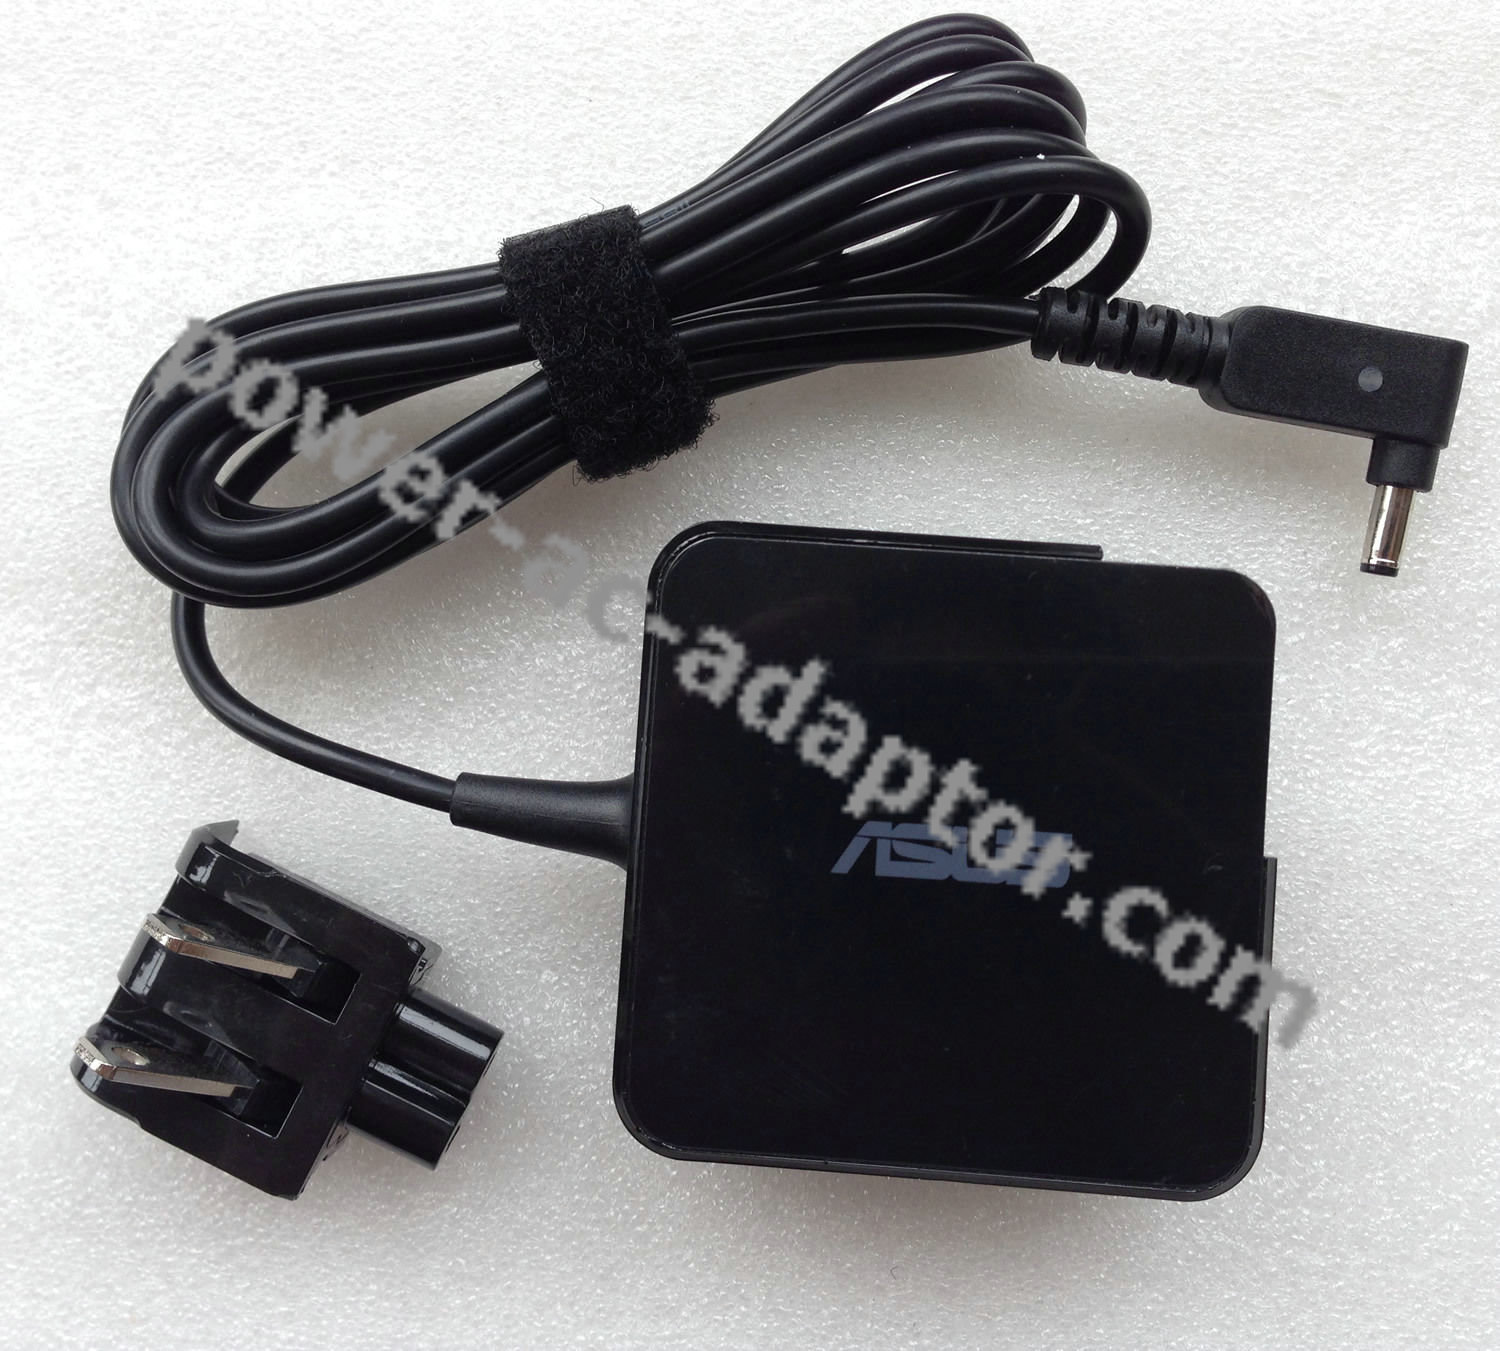 OEM ASUS 33W AC Power Adapter for ASUS X200CA-DH21T Notebook